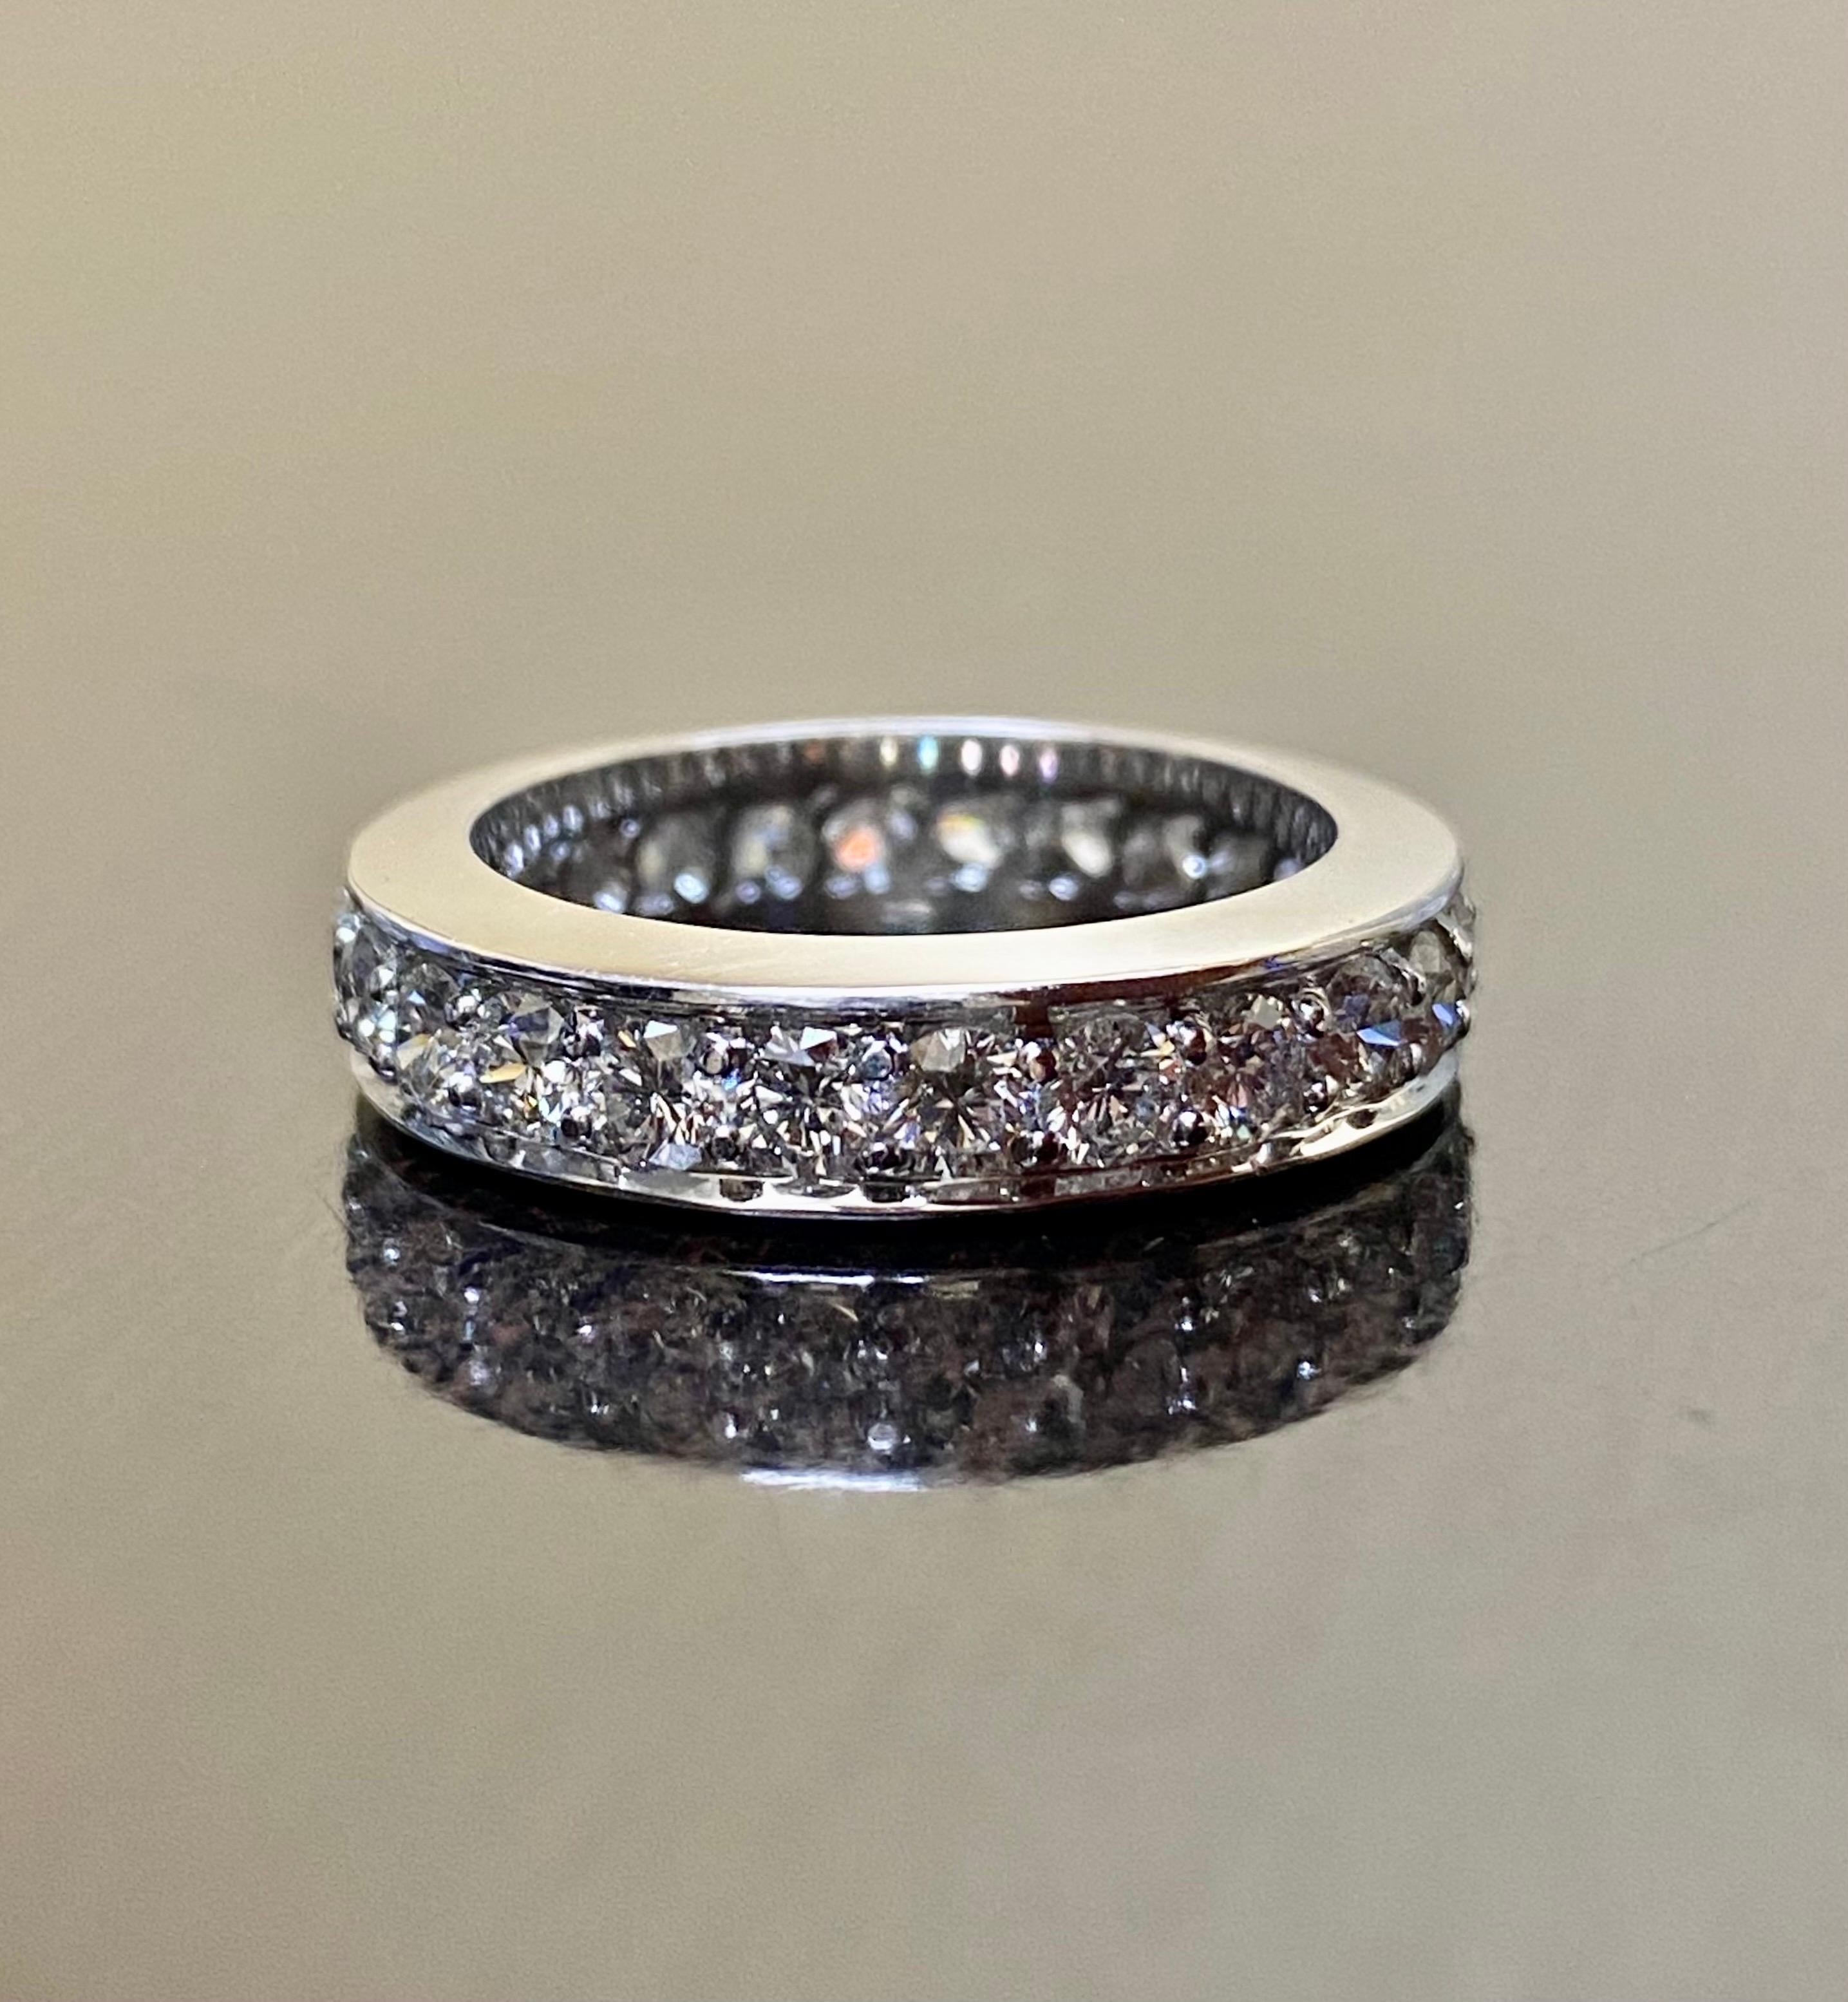 DeKara Designs Collection

Beautiful Art Deco Hand Engraved Eternity Pave Diamond Band.

This piece is handmade to perfection, from the stone setting to the engraving. High end band, for an affordable price.

Metal- 90% Platinum, 10% Iridium

Size-